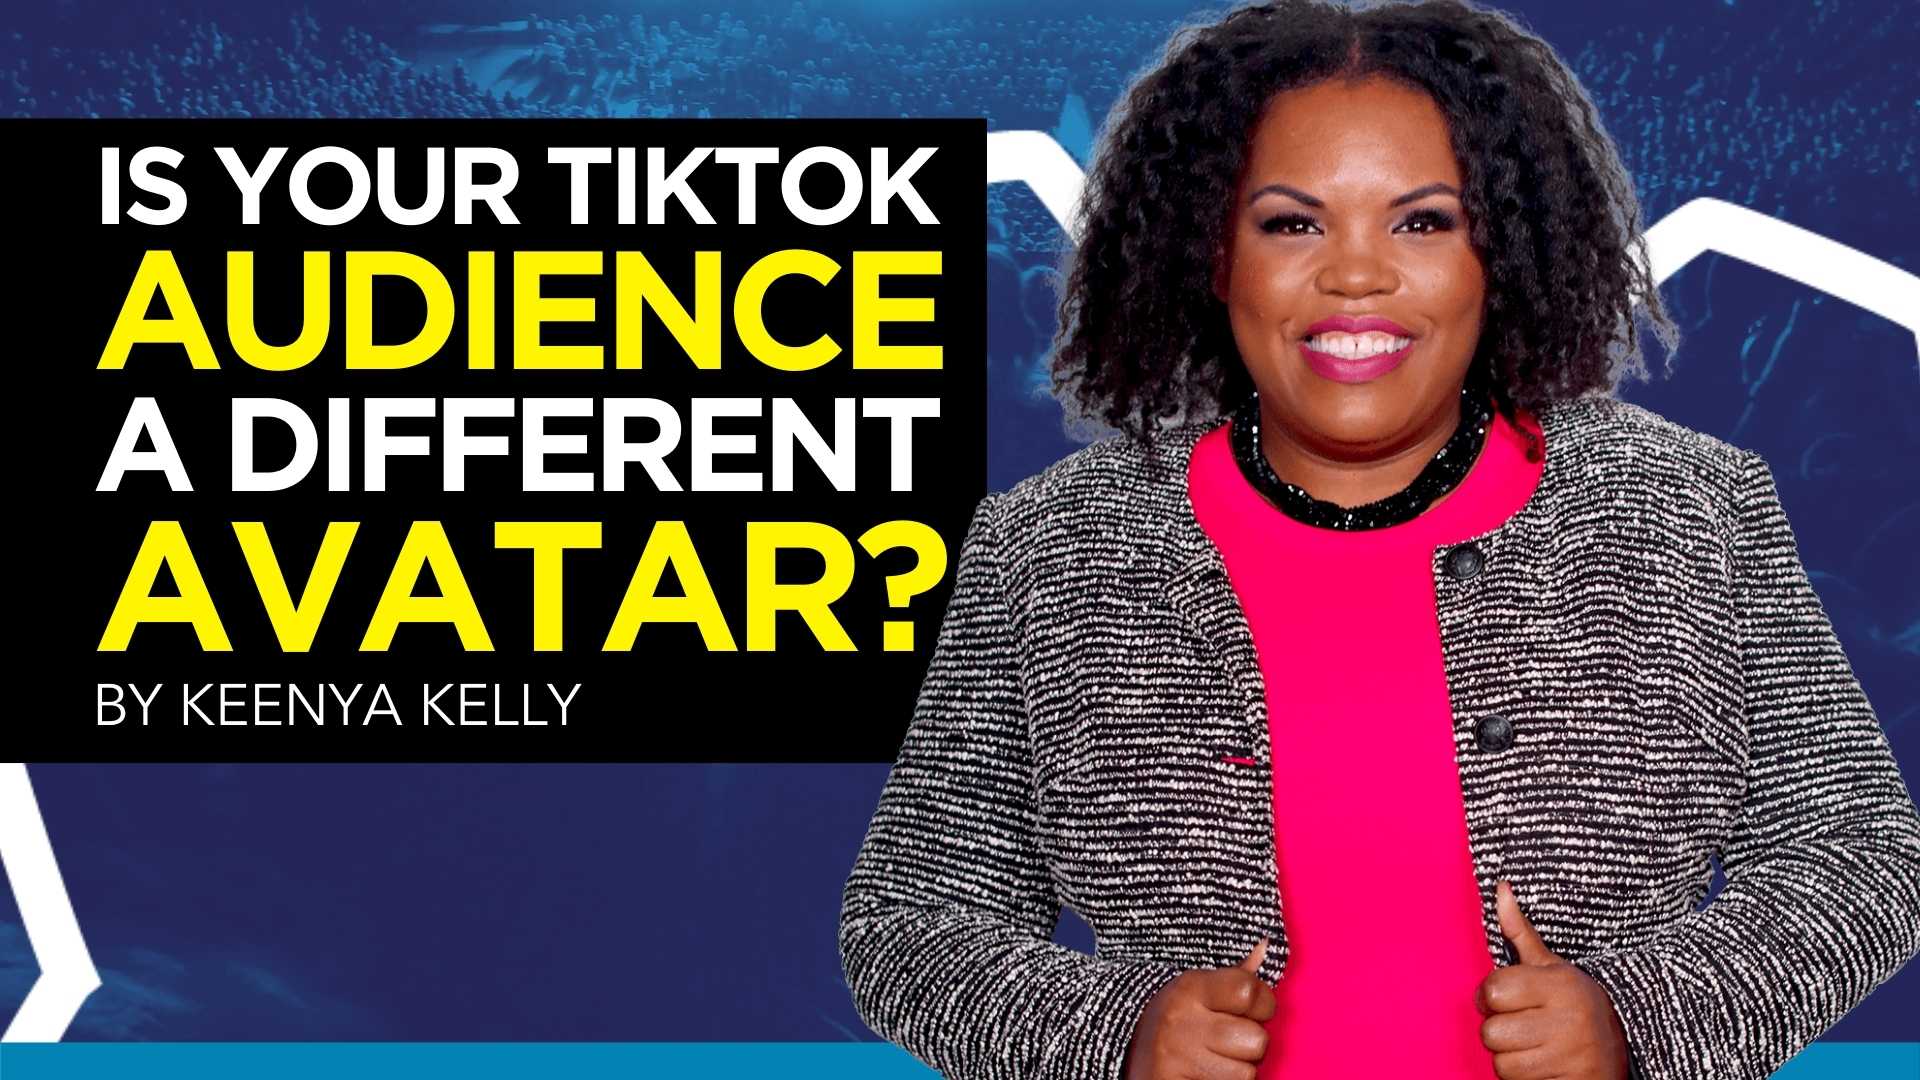 Is Your TikTok Audience a Different Avatar?